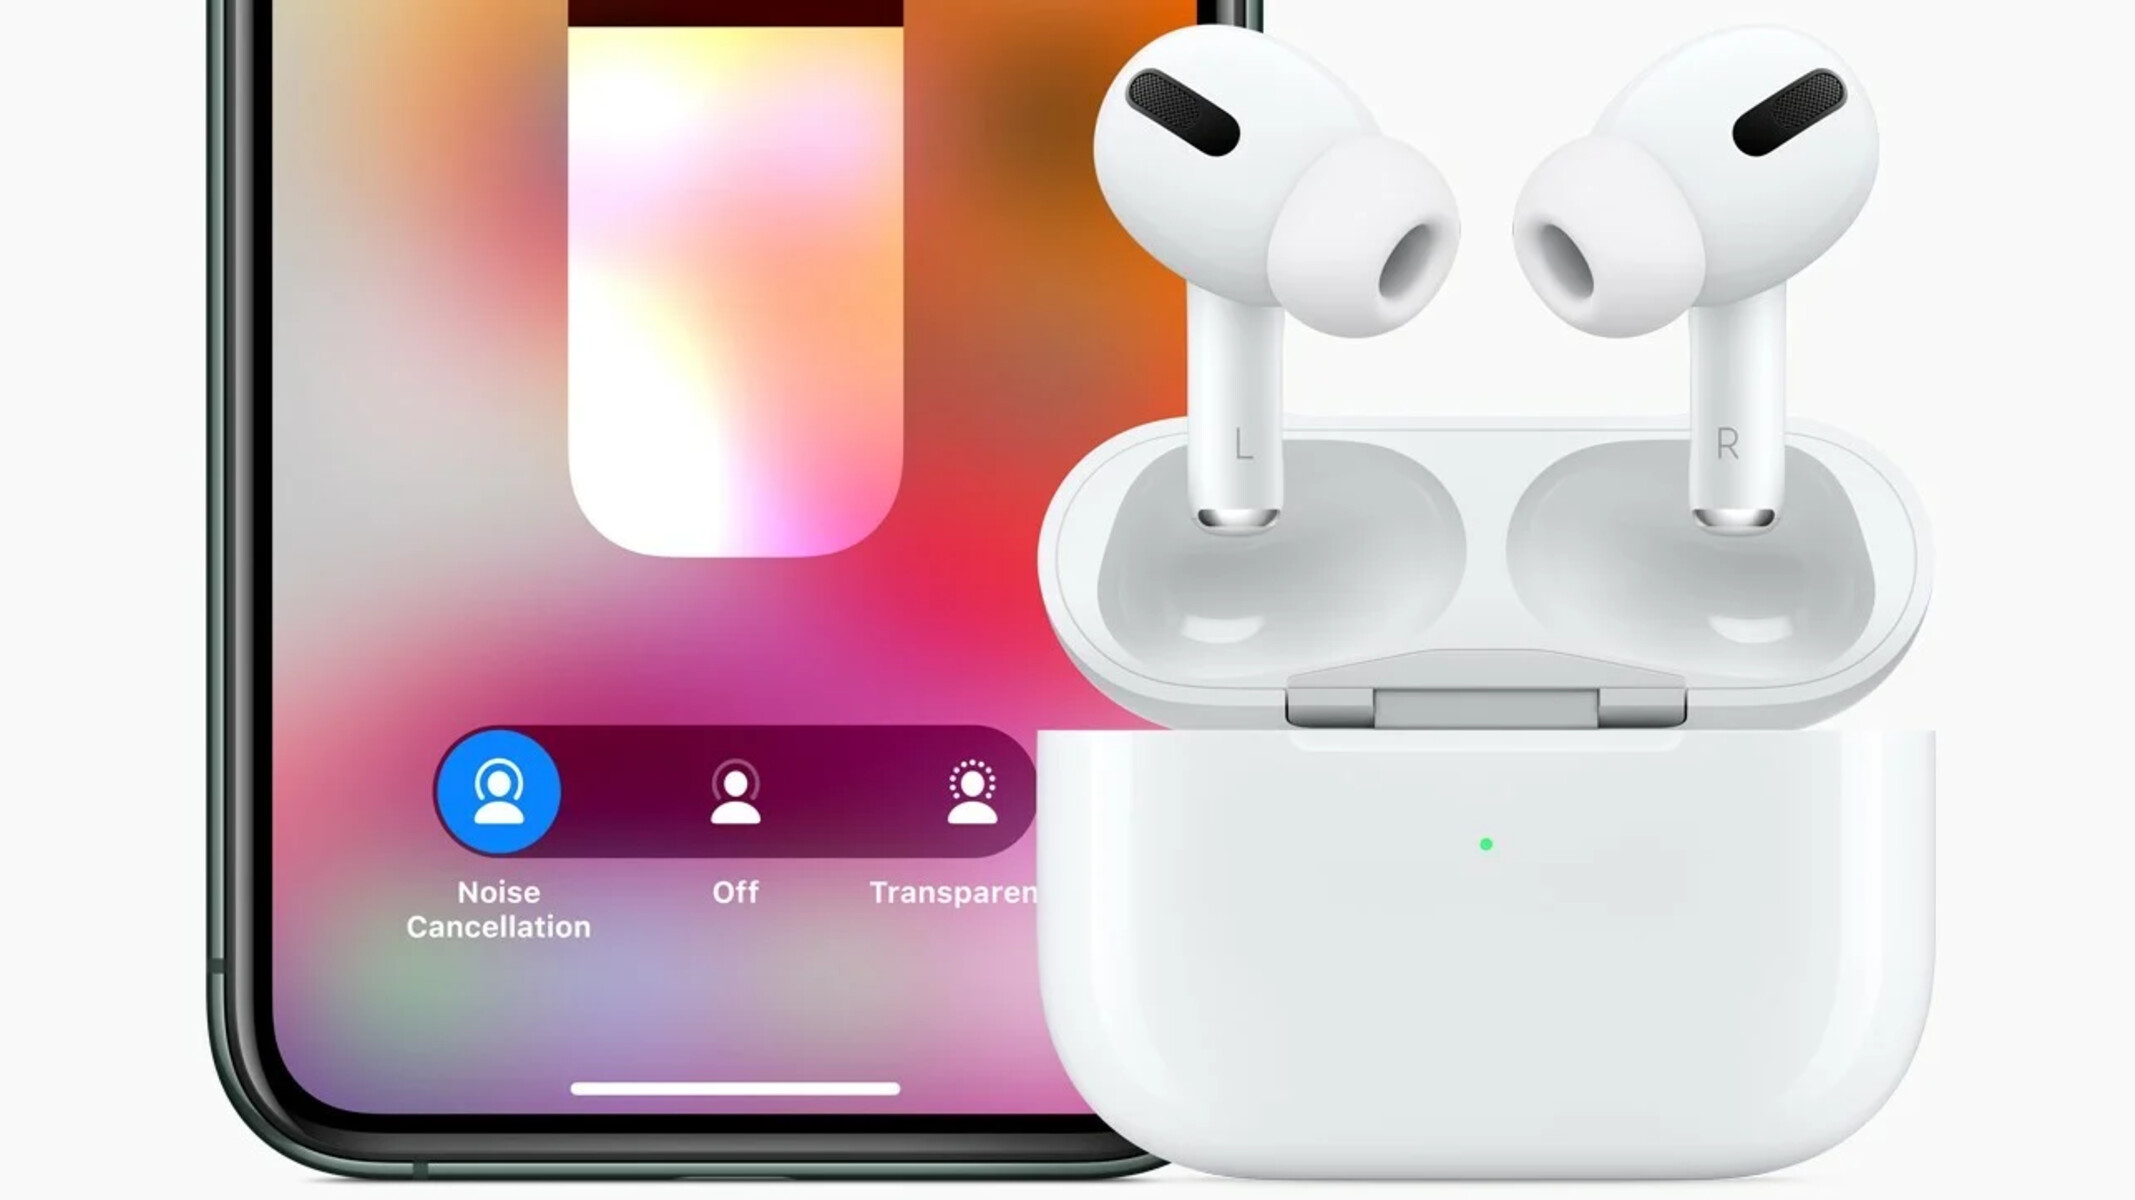 How To Cancel Noise Cancellation On Airpods Pro